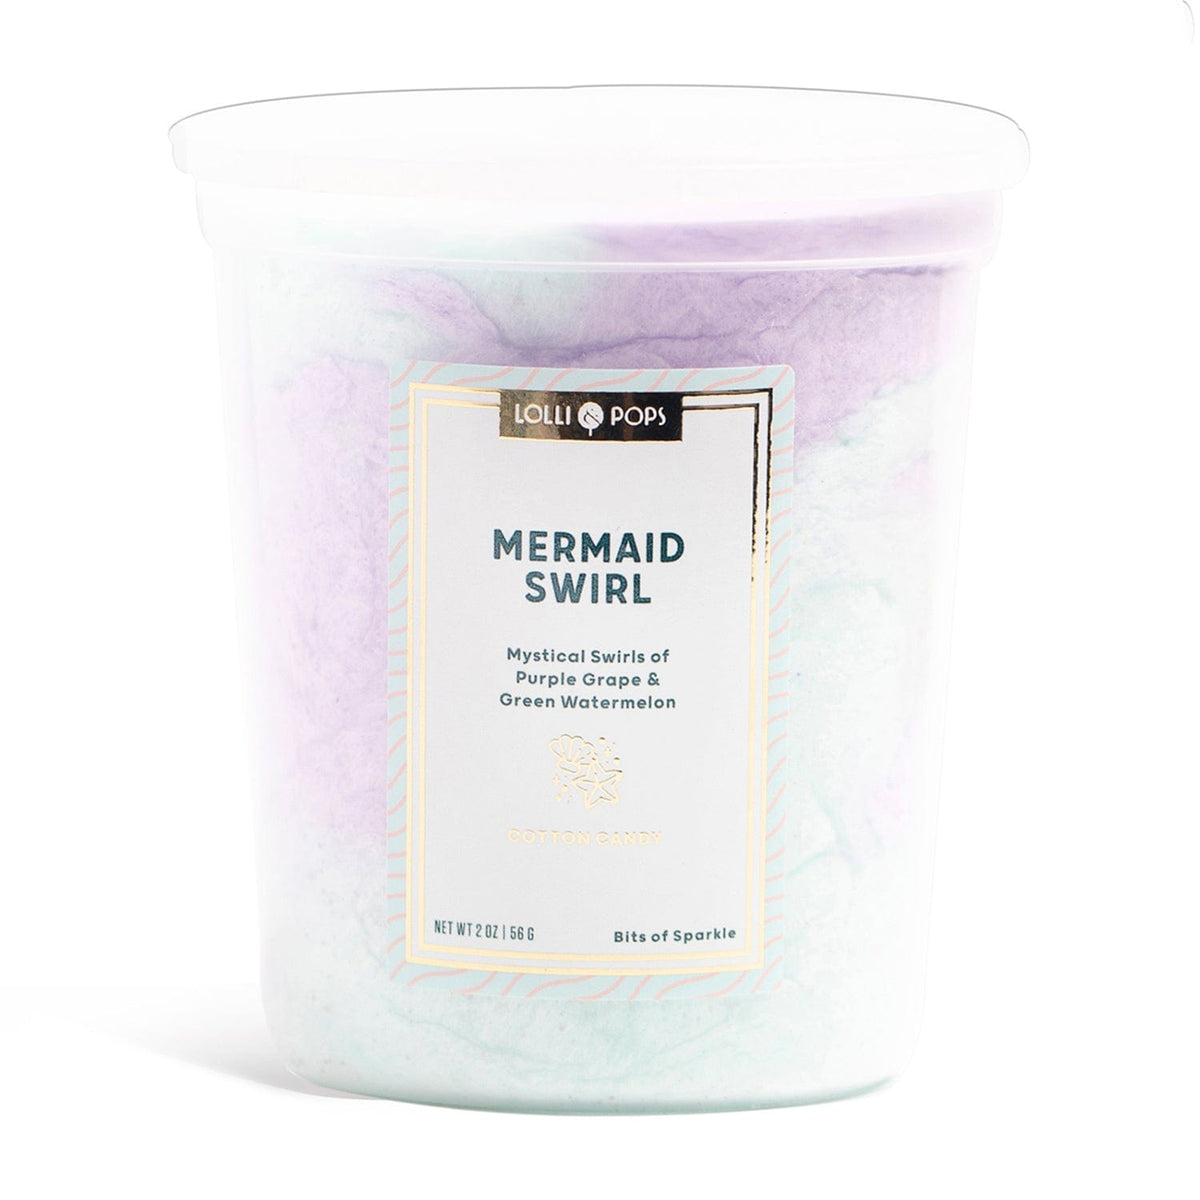 Lolli and Pops L&amp;P Collection Mermaid Swirl Cotton Candy